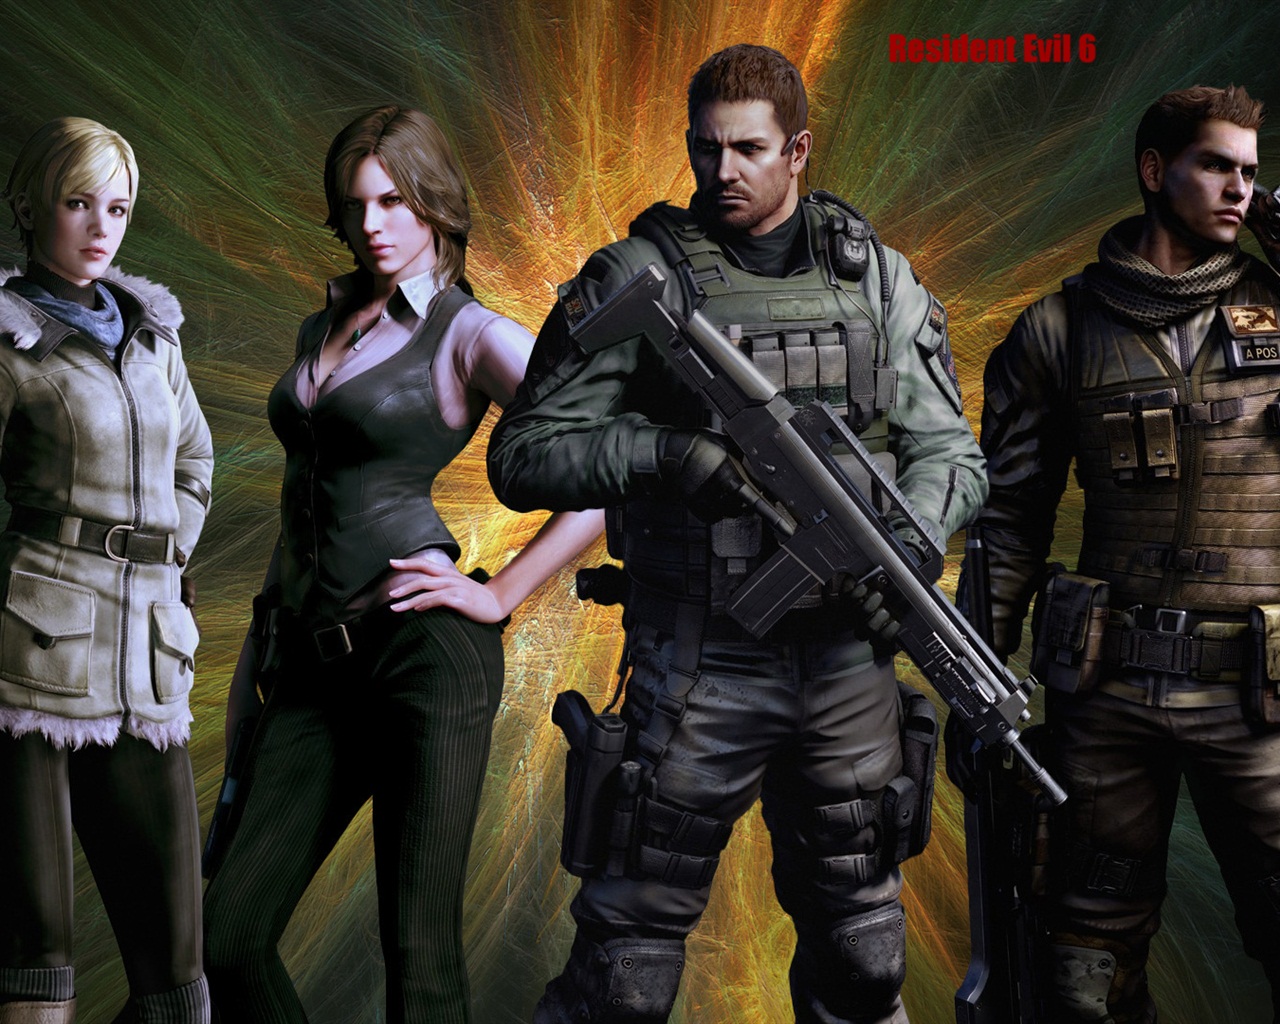 Resident Evil 6 HD game wallpapers #4 - 1280x1024